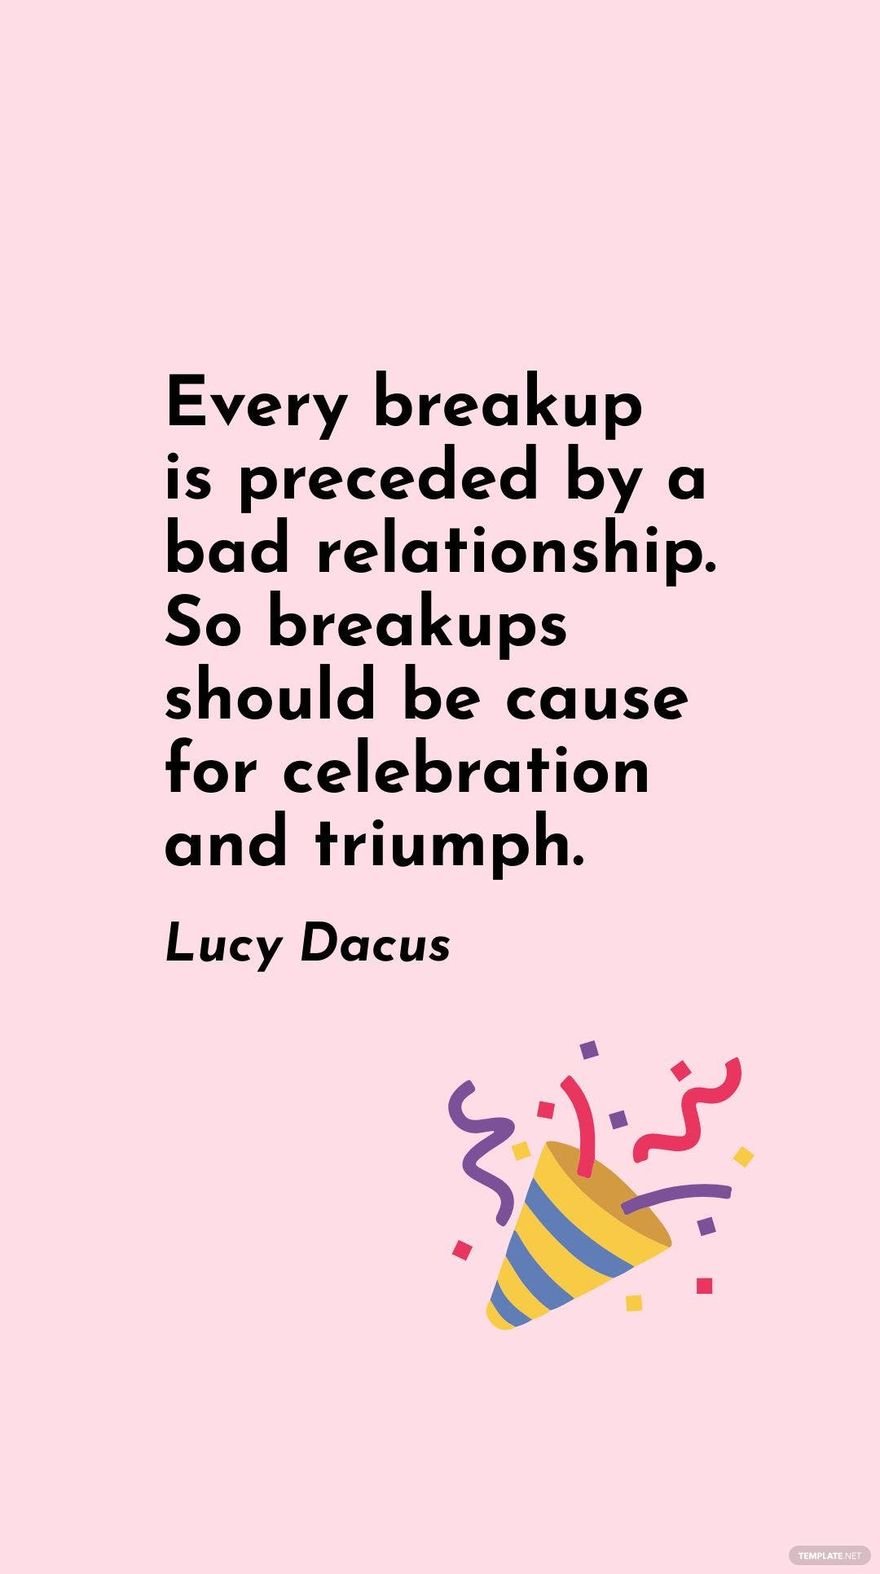 Free Lucy Dacus - Every breakup is preceded by a bad relationship. So breakups should be cause for celebration and triumph. in JPG